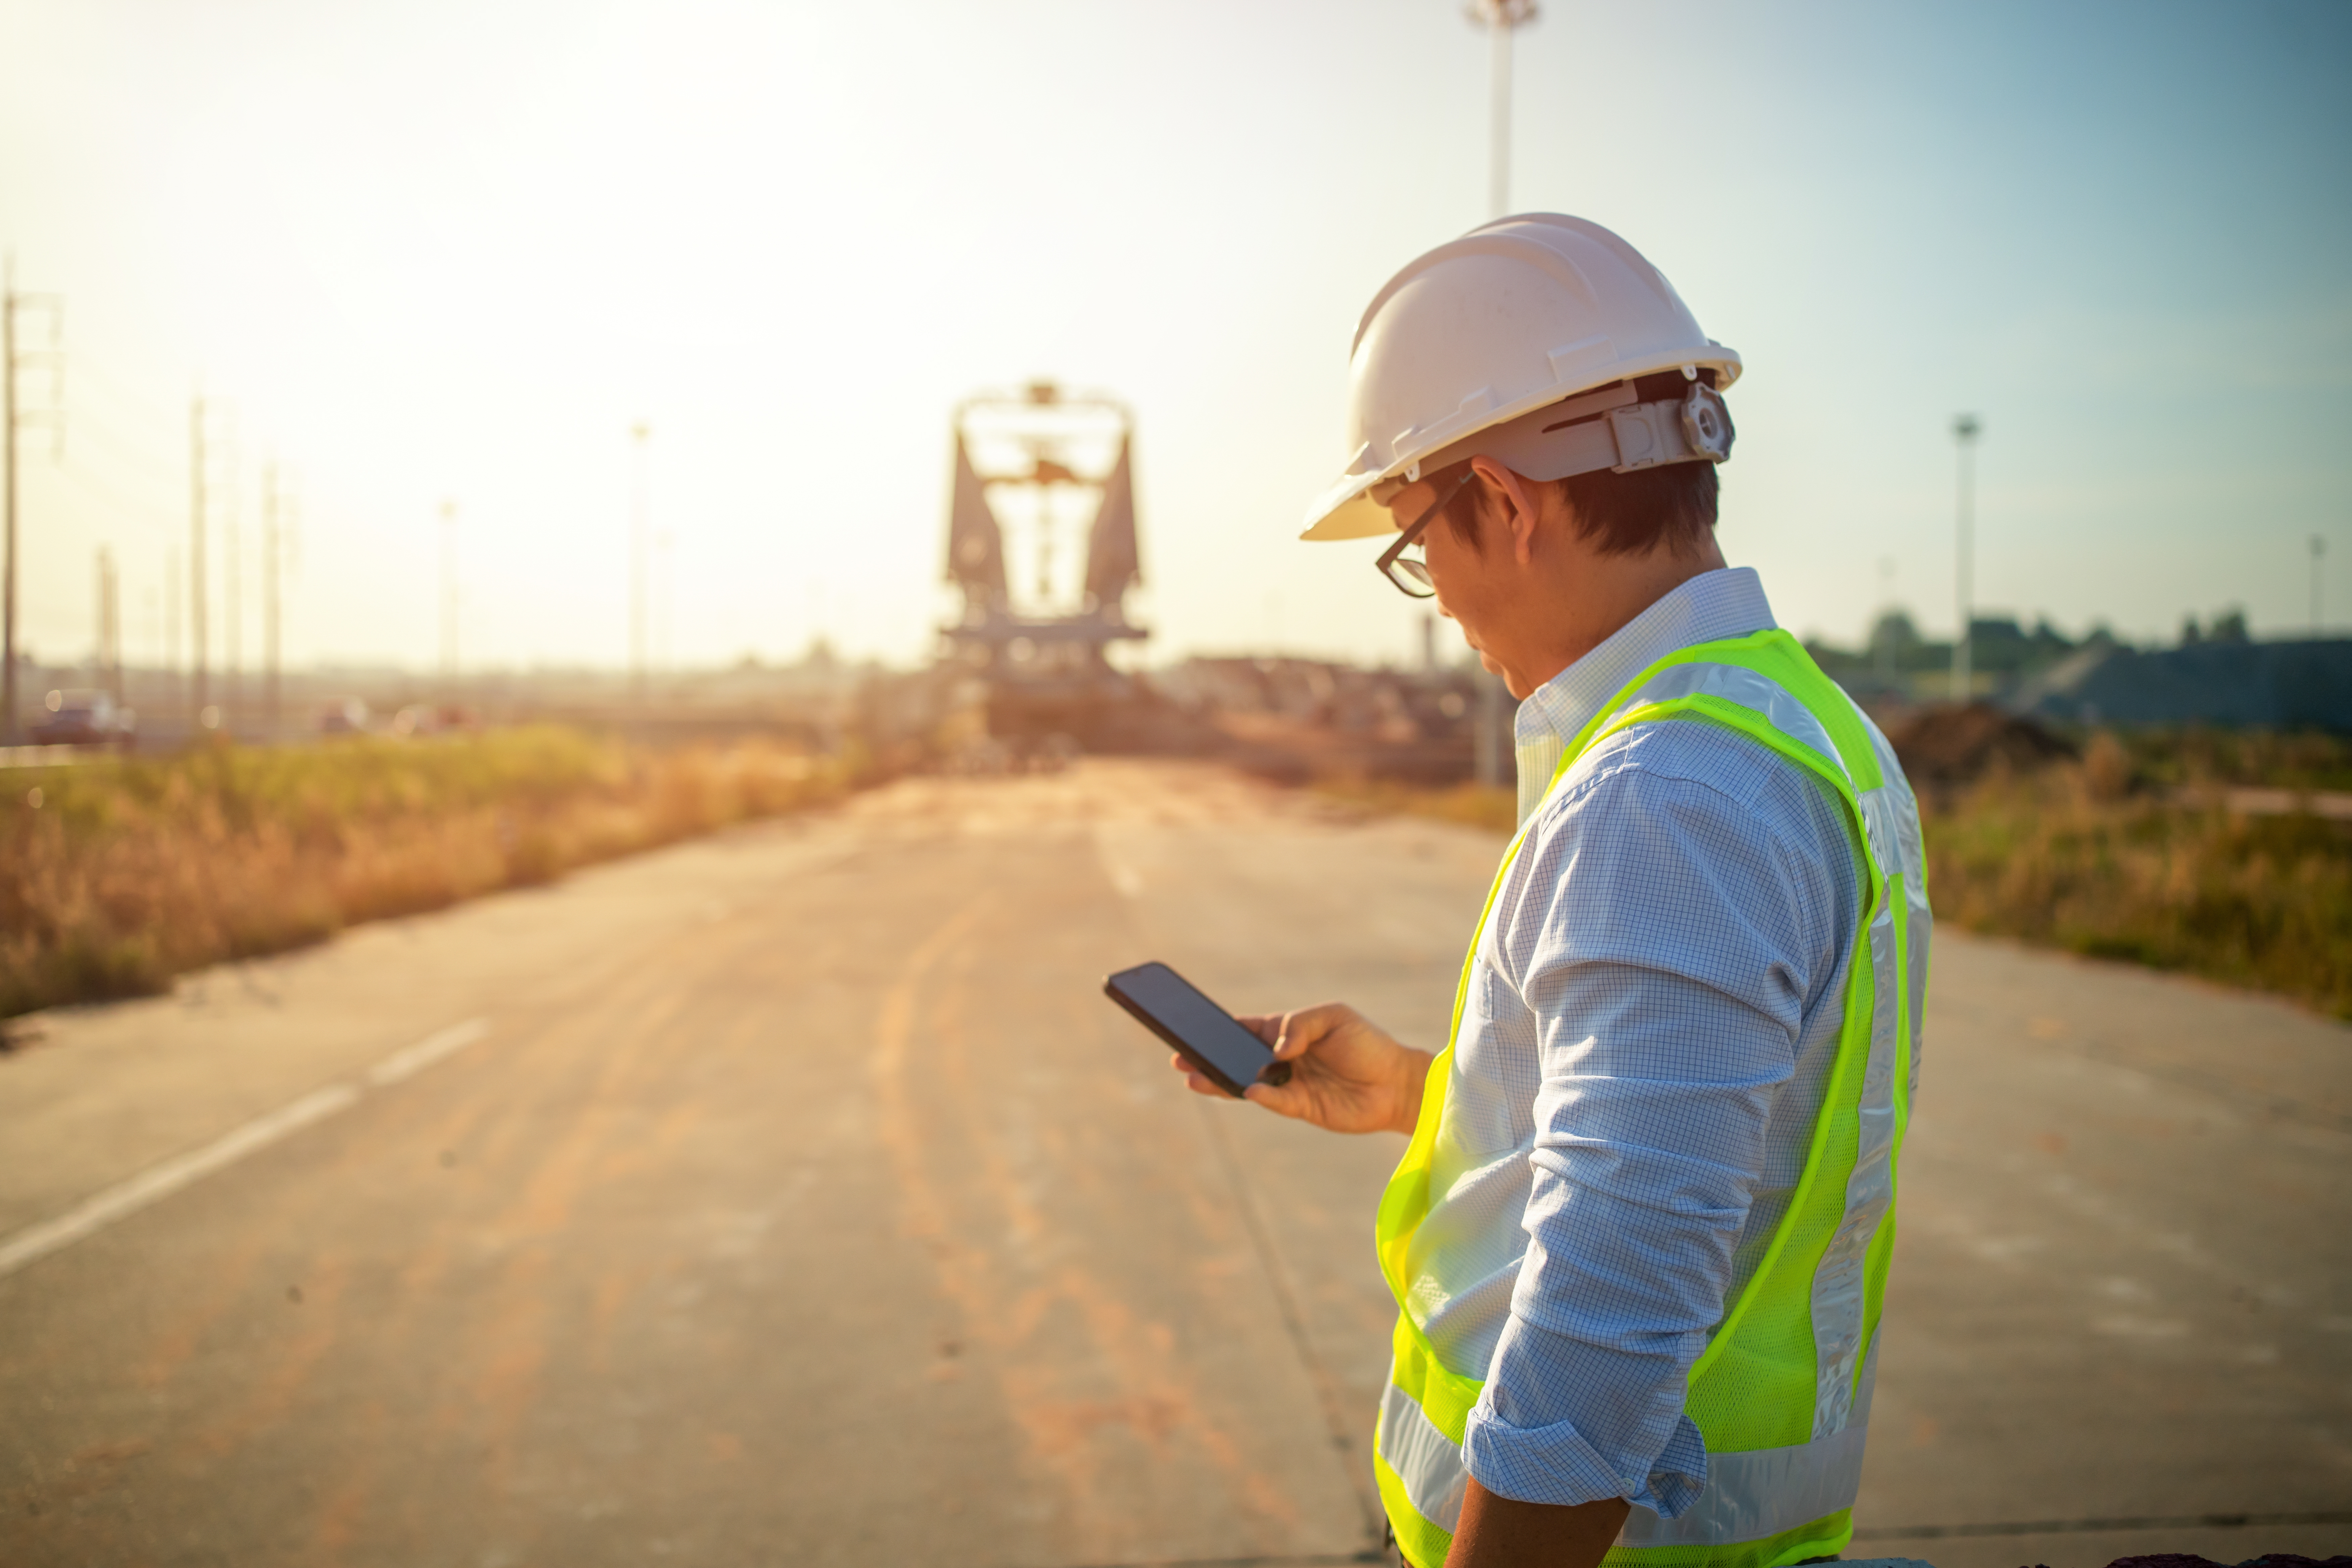 FI™ Voice driven AI technology in action on a jobsite